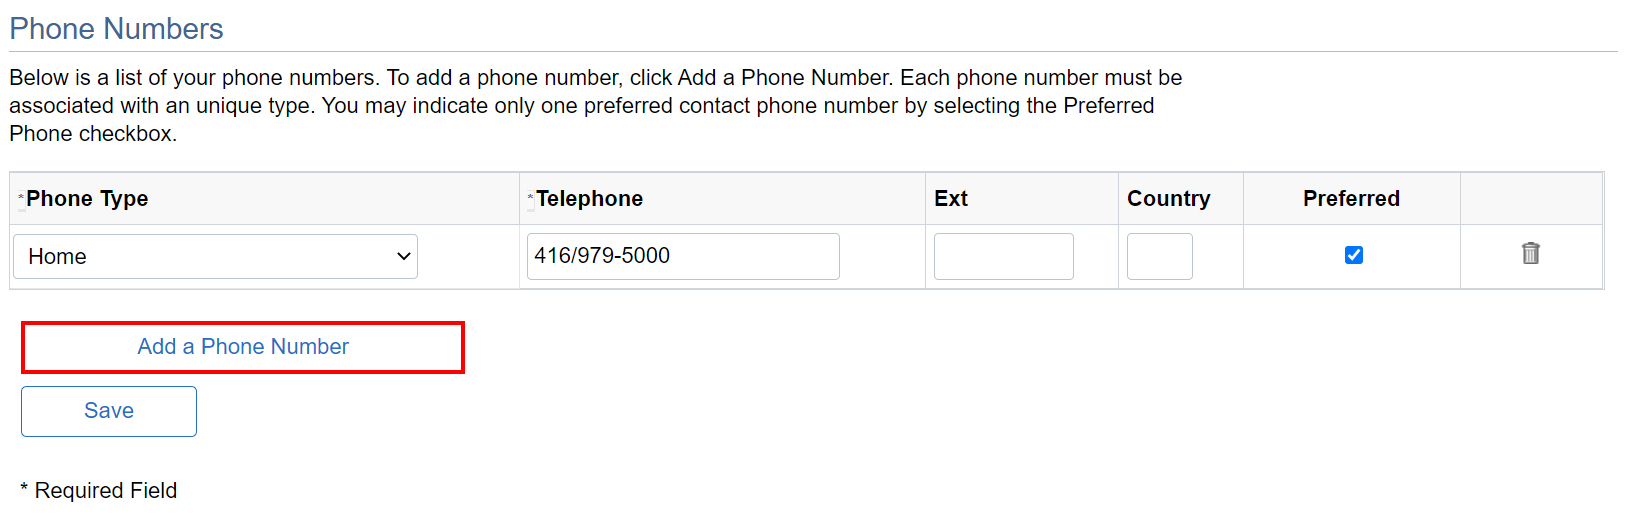 Phone Numbers page with button to Add a Phone Number